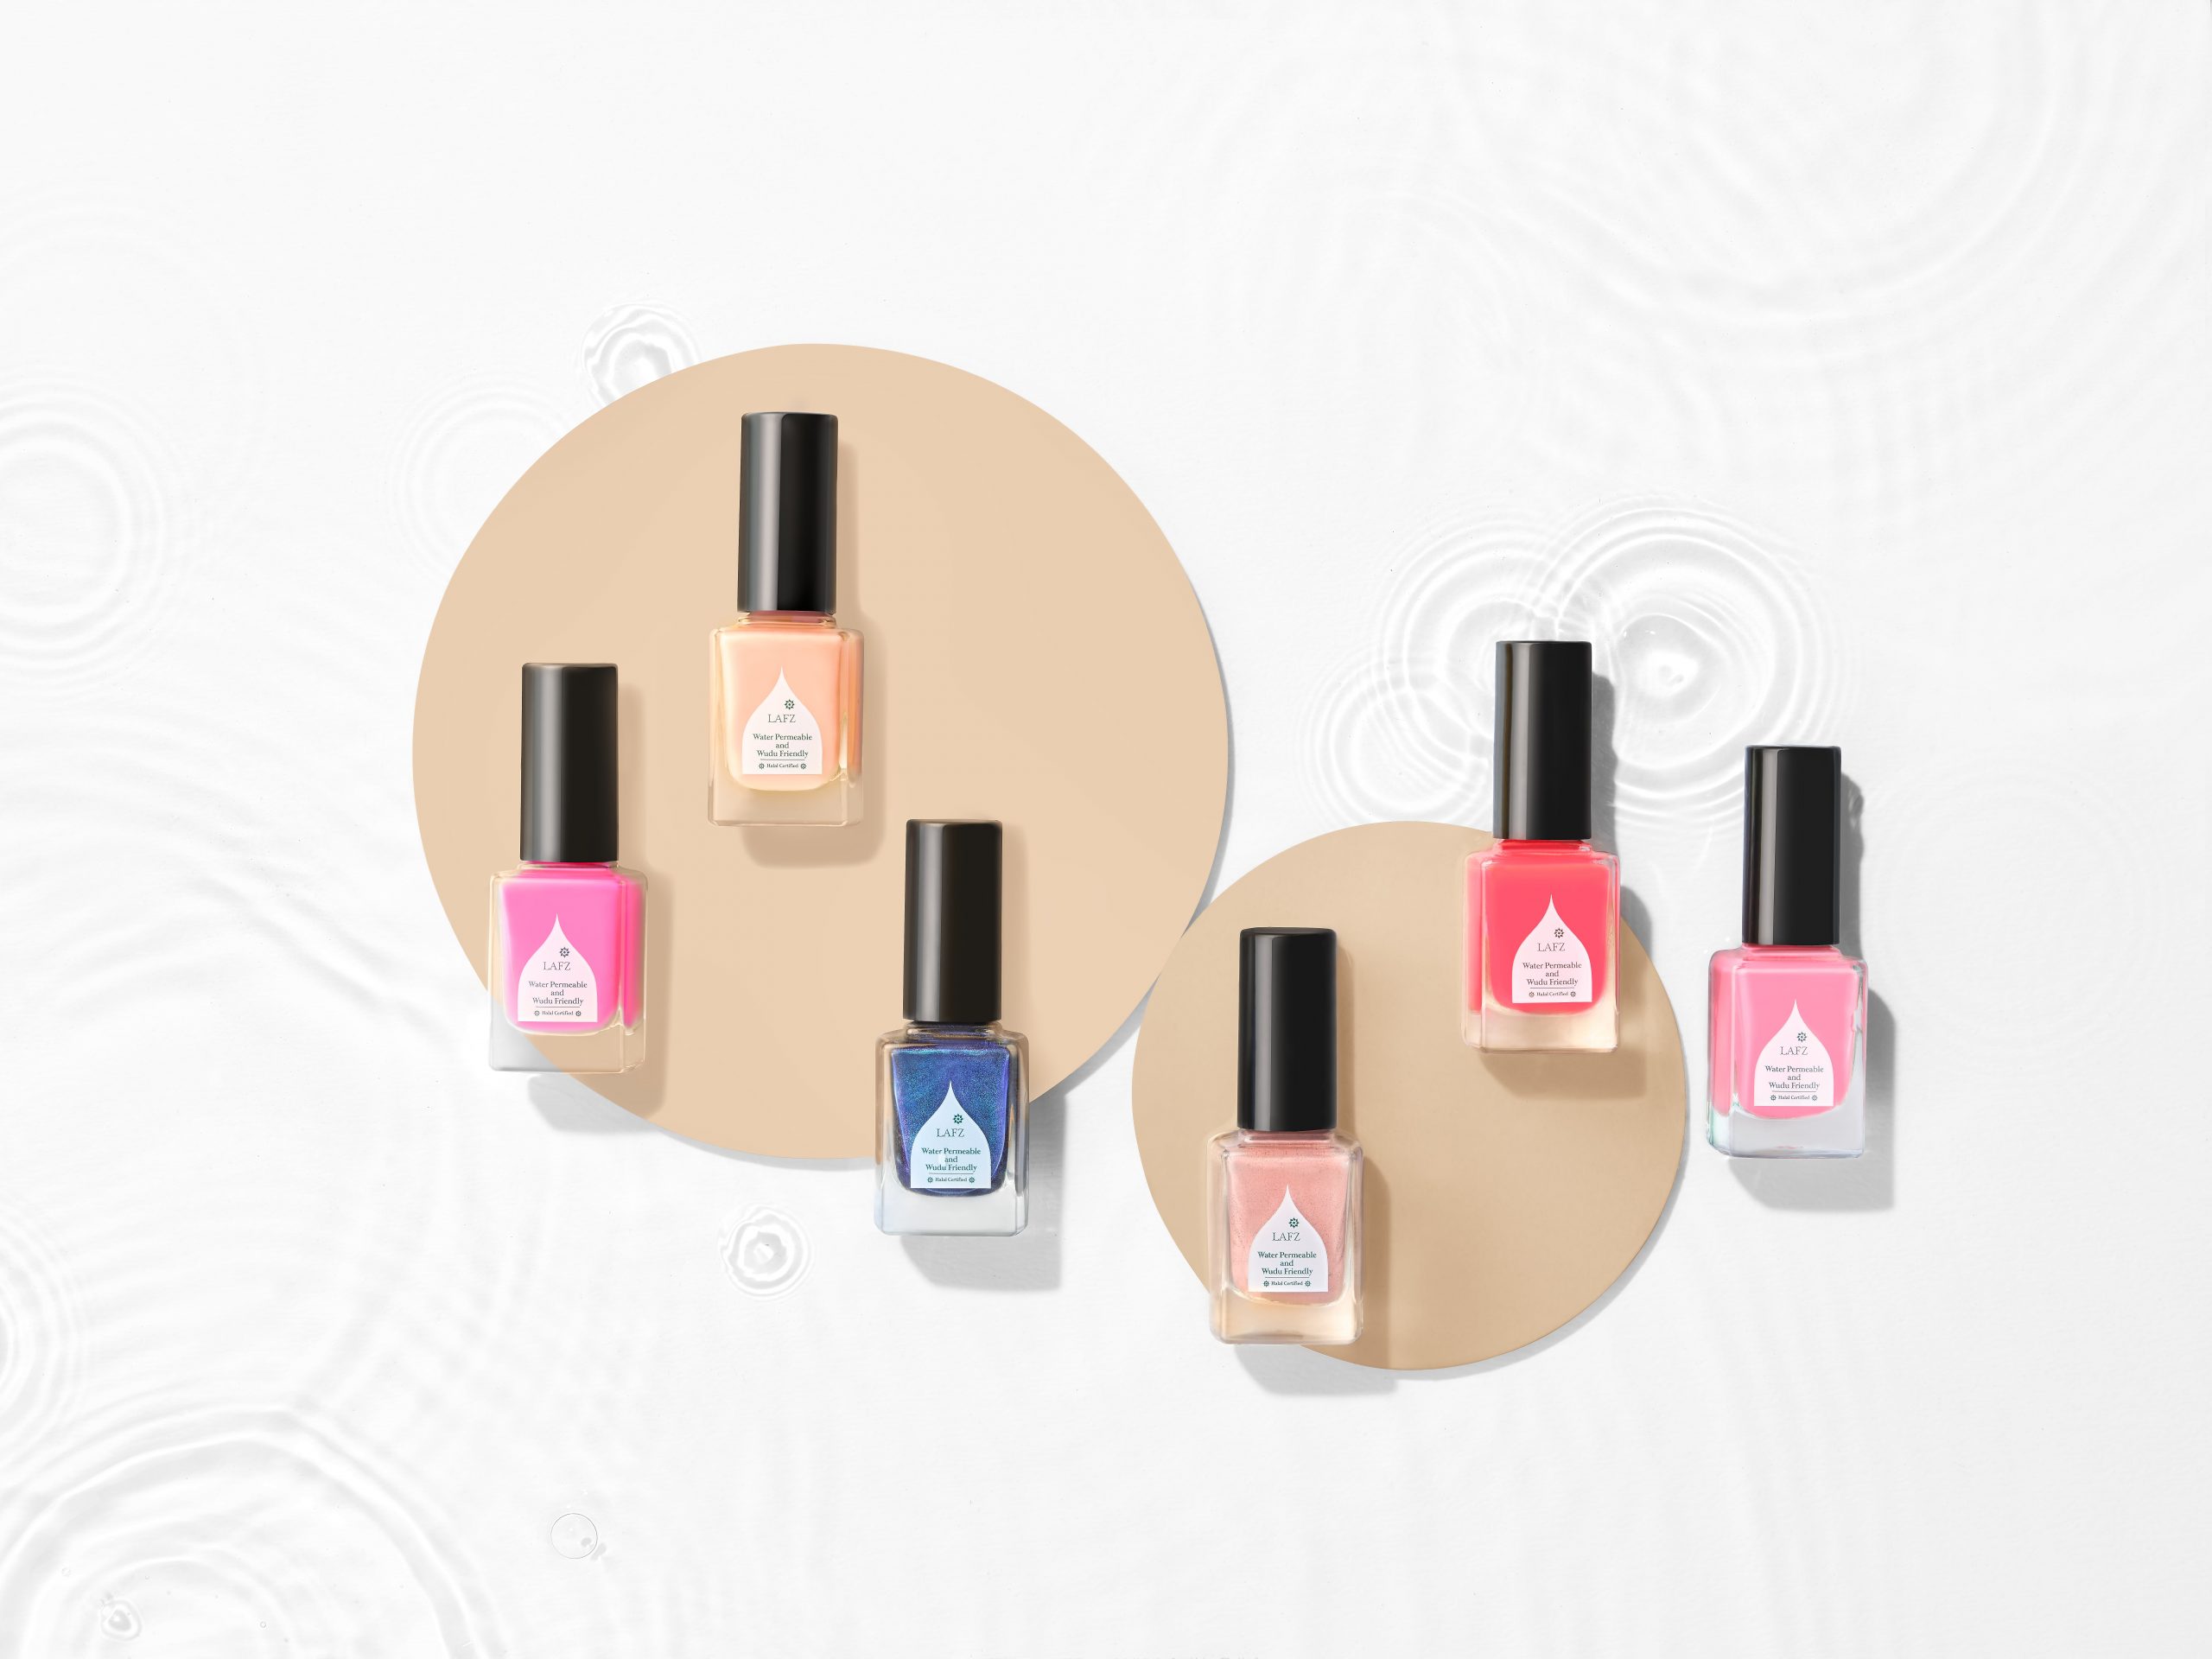 Nail Polish - Water Permeable? How can I know for sure - Lafz